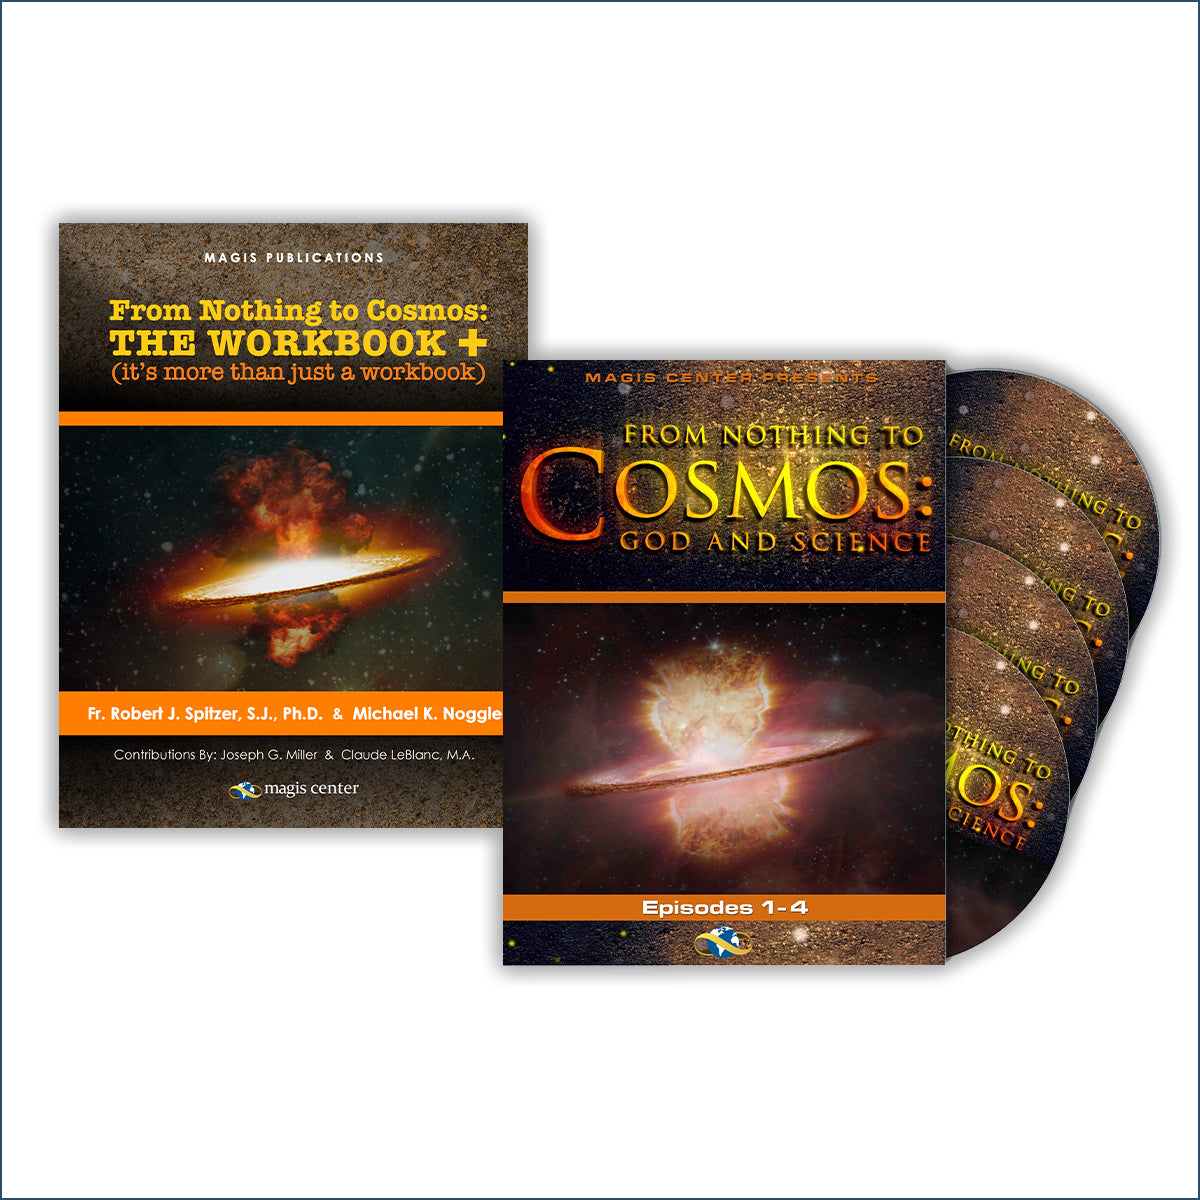 From Nothing To Cosmos – 4 DVDs and The Workbook +